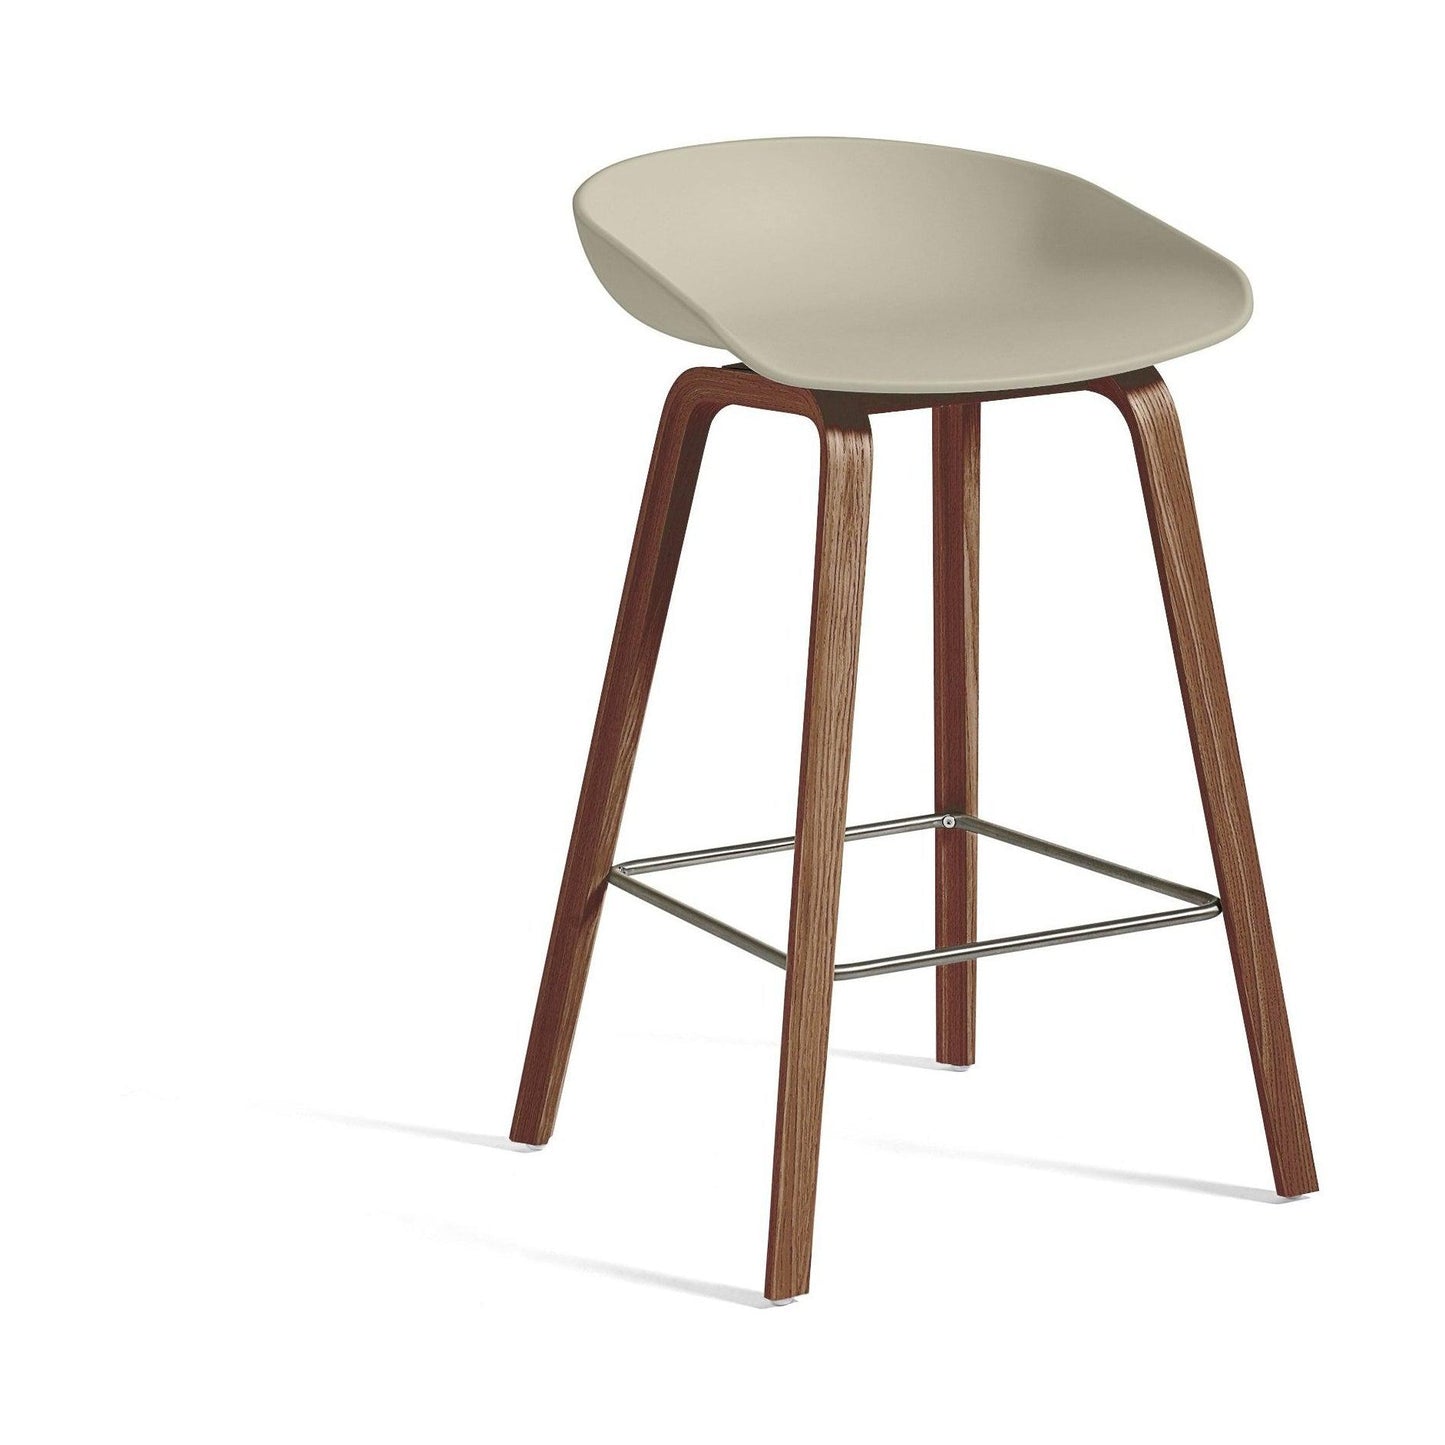 HAY About a Stool AAS 32 barkruk H65 walnoot Pastel Green 2.0